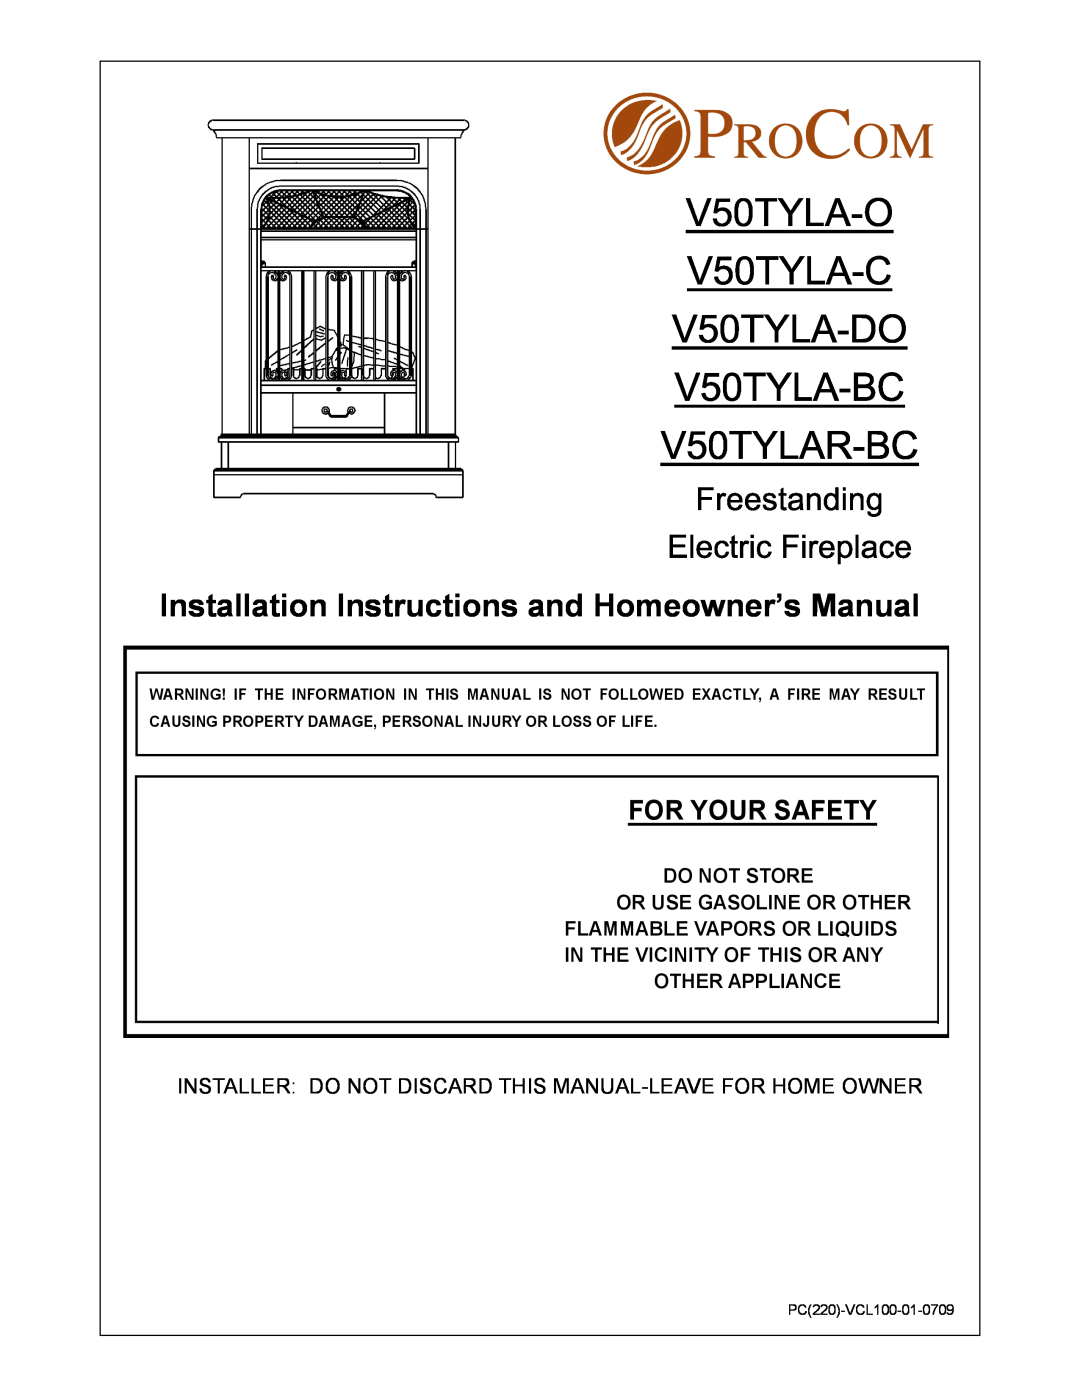 Procom V50TYLA-DO installation instructions For Your Safety, Do Not Store Or Use Gasoline Or Other, PC220-VCL100-01-0709 